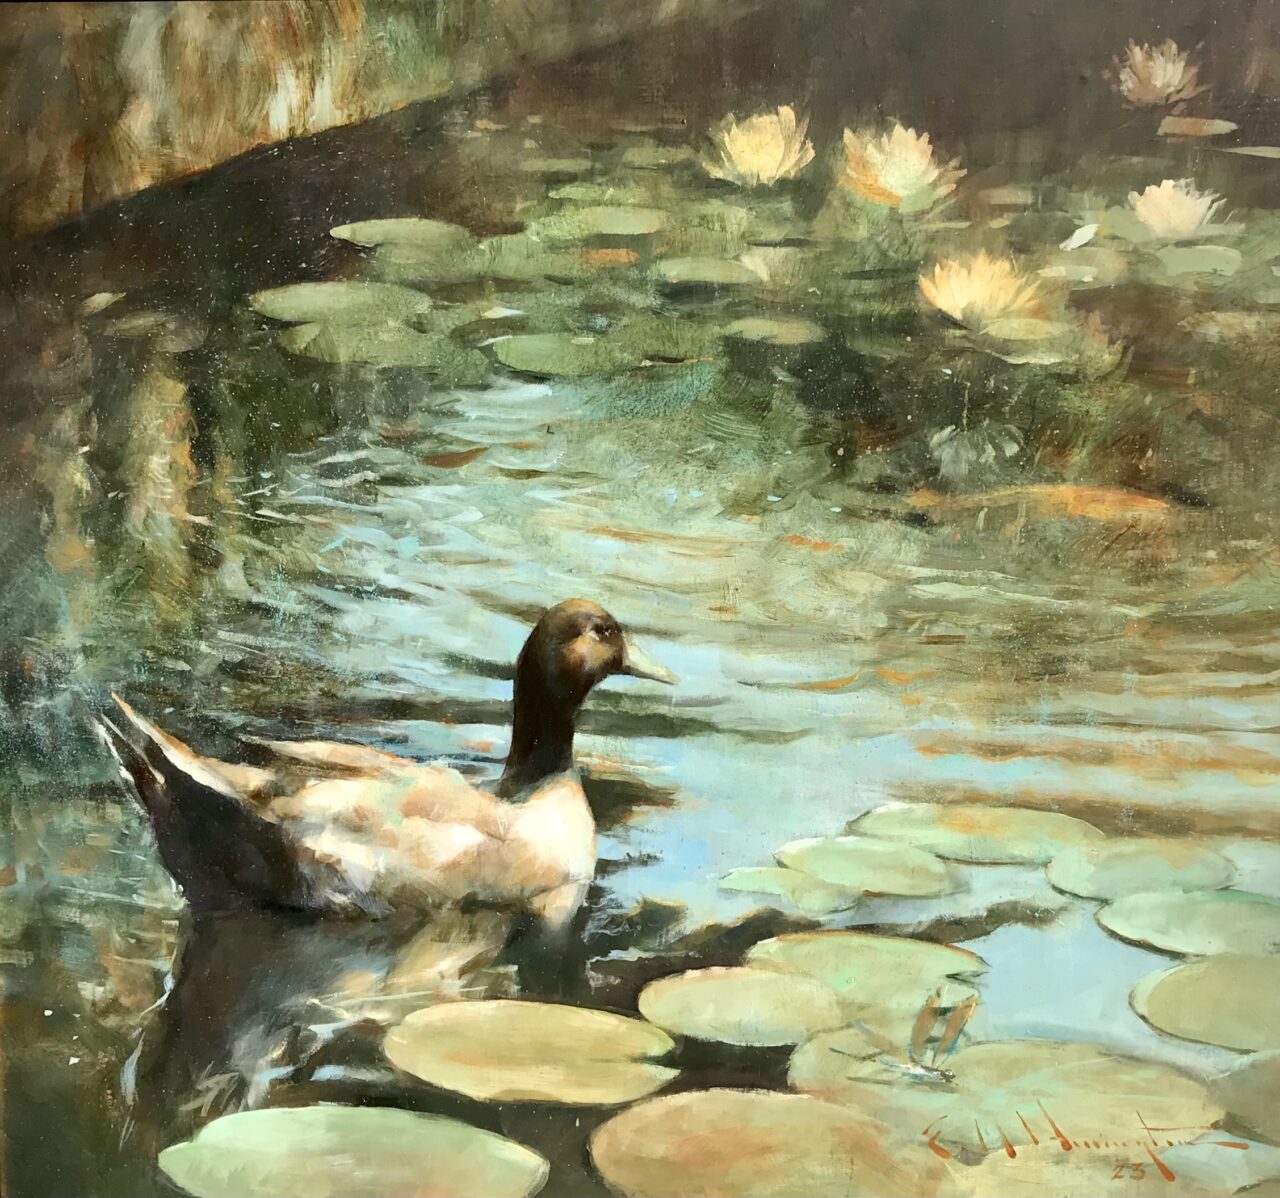 DUCK and LILIES by Evan Harrington - 18 x 20 inches, oil on linen on board • $5,000